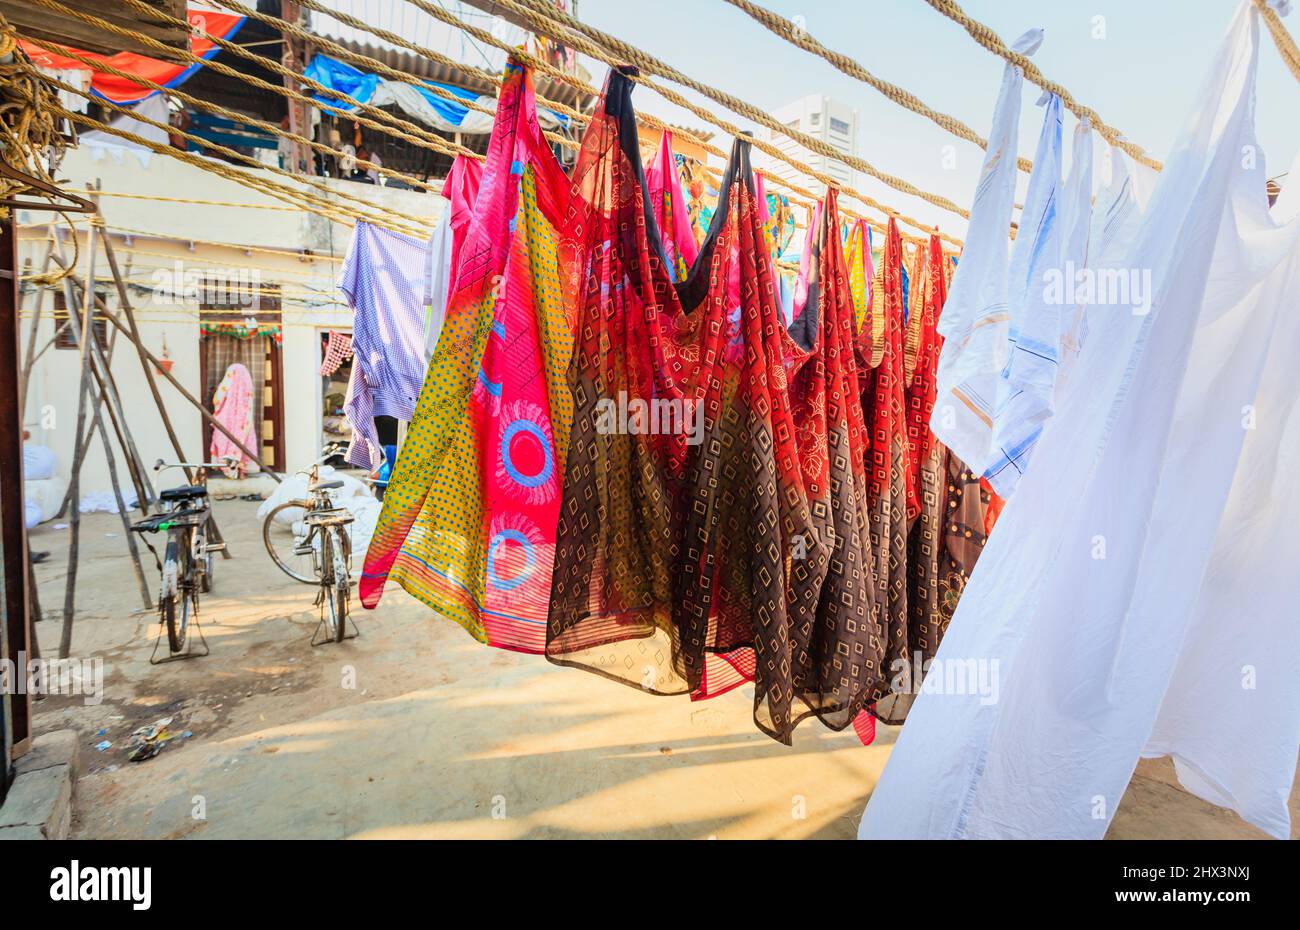 Colourful saris and white sheets hanging out to dry, drying in the sun in Mahalaxmi Dhobi Ghat, a large open air laundromat in Mumbai, India Stock Photo